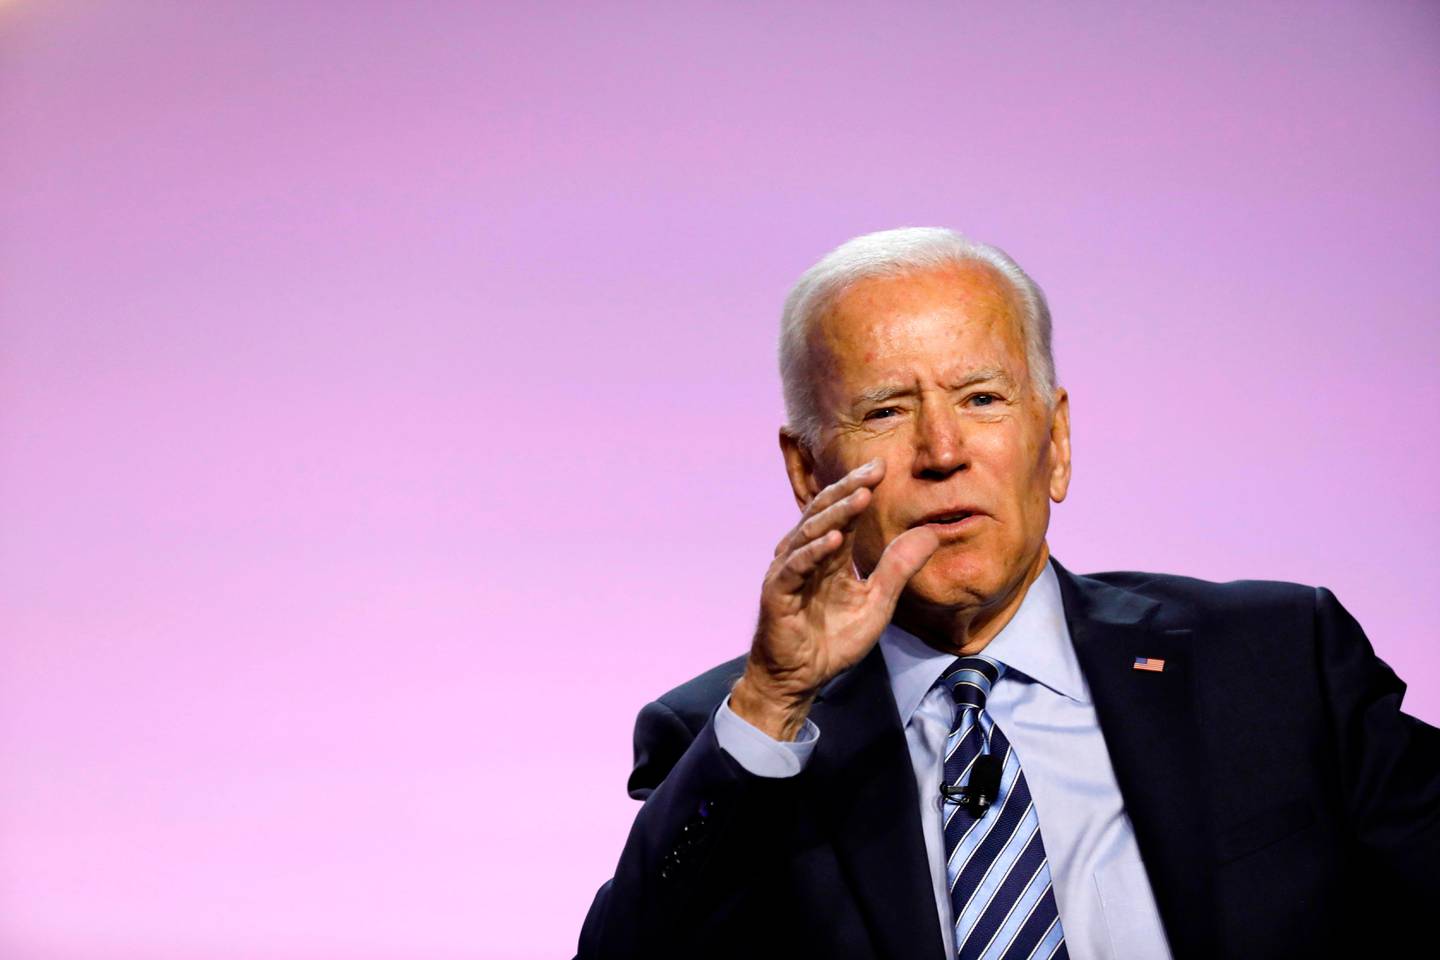 Democratic 2020 presidential candidate Joe Biden addresses Presidential Forum the NAACP's 110th National Convention at Cobo Center on July 24, 2019, in Detroit, Michigan. (Photo by JEFF KOWALSKY / AFP)